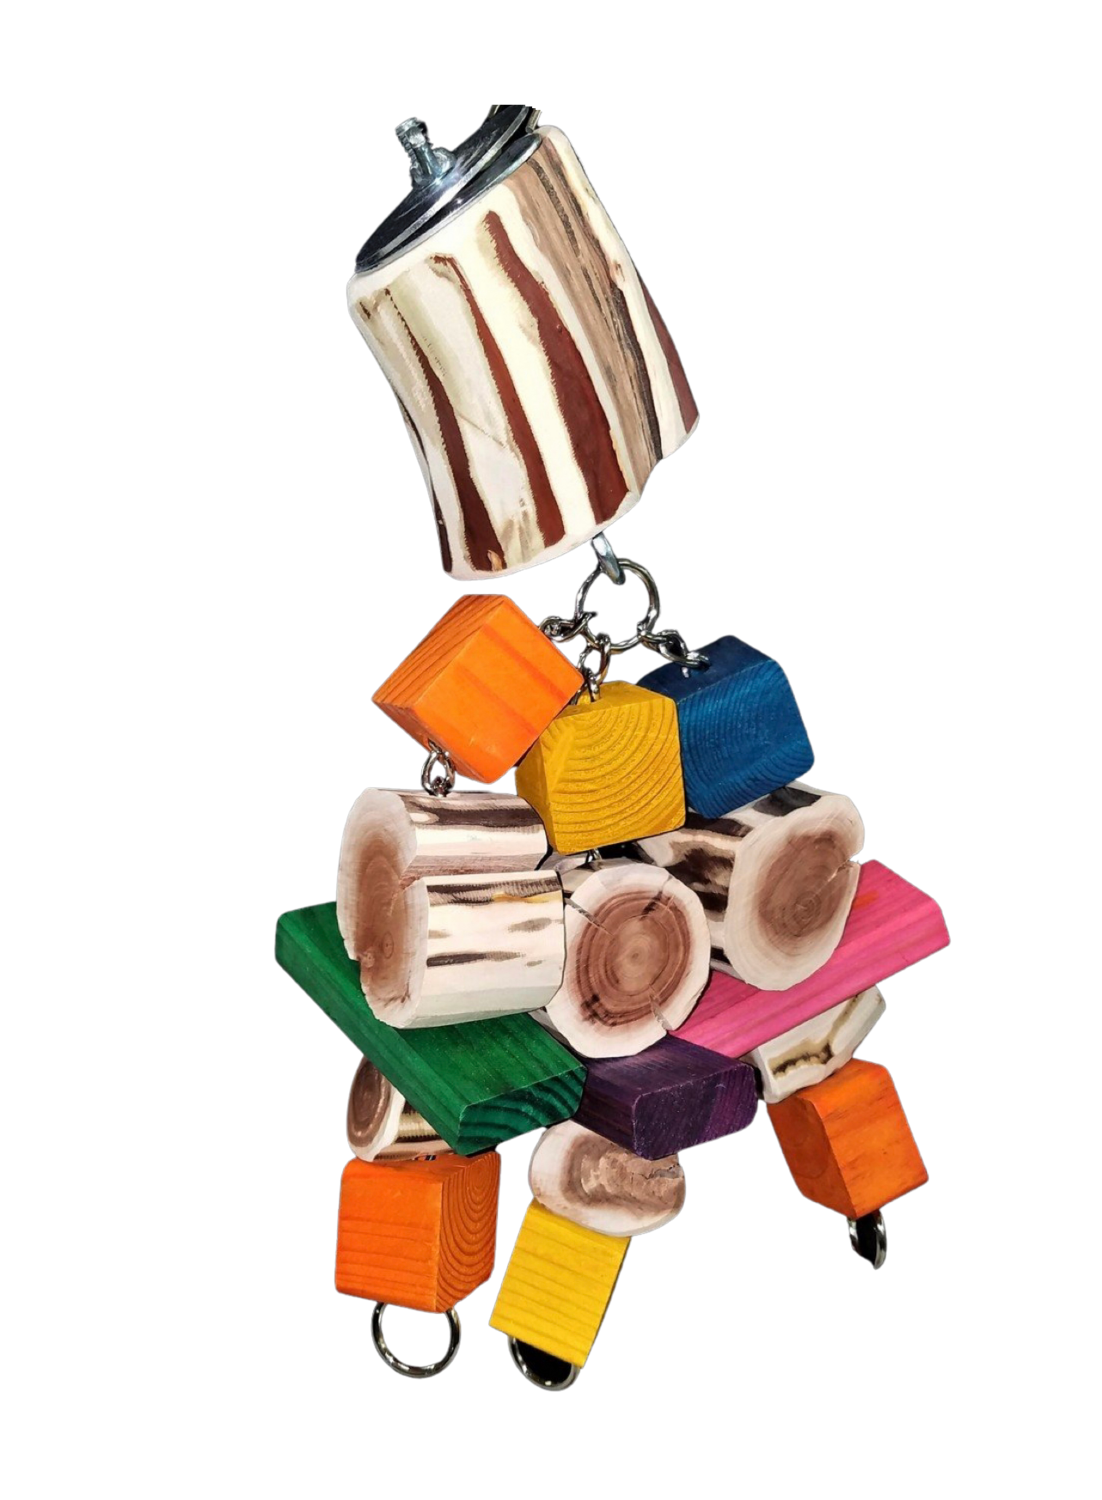 Bolt on Manzanita Toy made with a mix of natural manzanita & colorful pine wood blocks some with grooves and some smooth - hand made in the USA, perfect for the big chewers who are Large & Extra Large